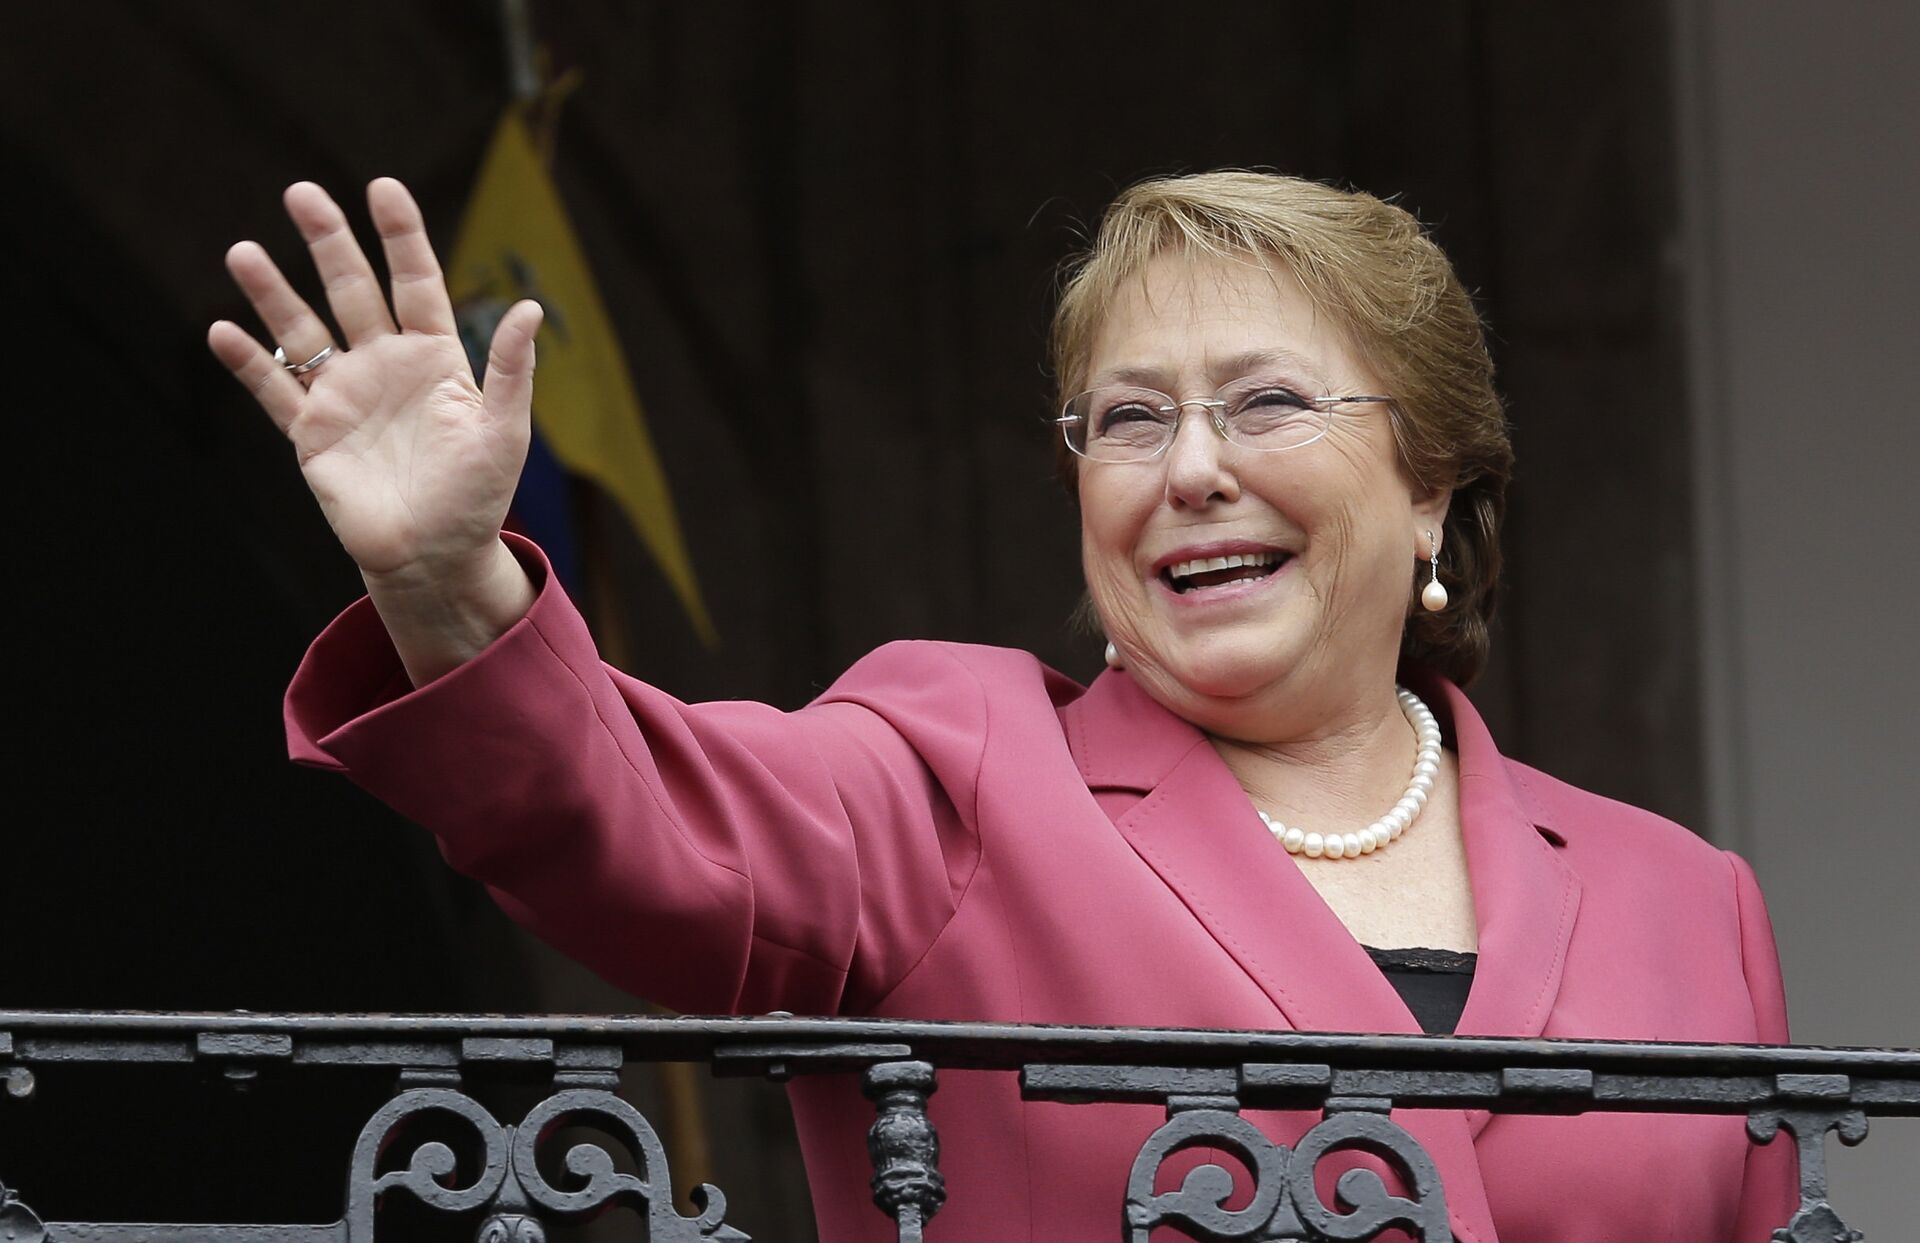 Chile's President Michelle Bachelet waves from a Government Palace balcony in Quito, Ecuador, Thursday, Oct. 15, 2015. - Sputnik Mundo, 1920, 13.12.2022